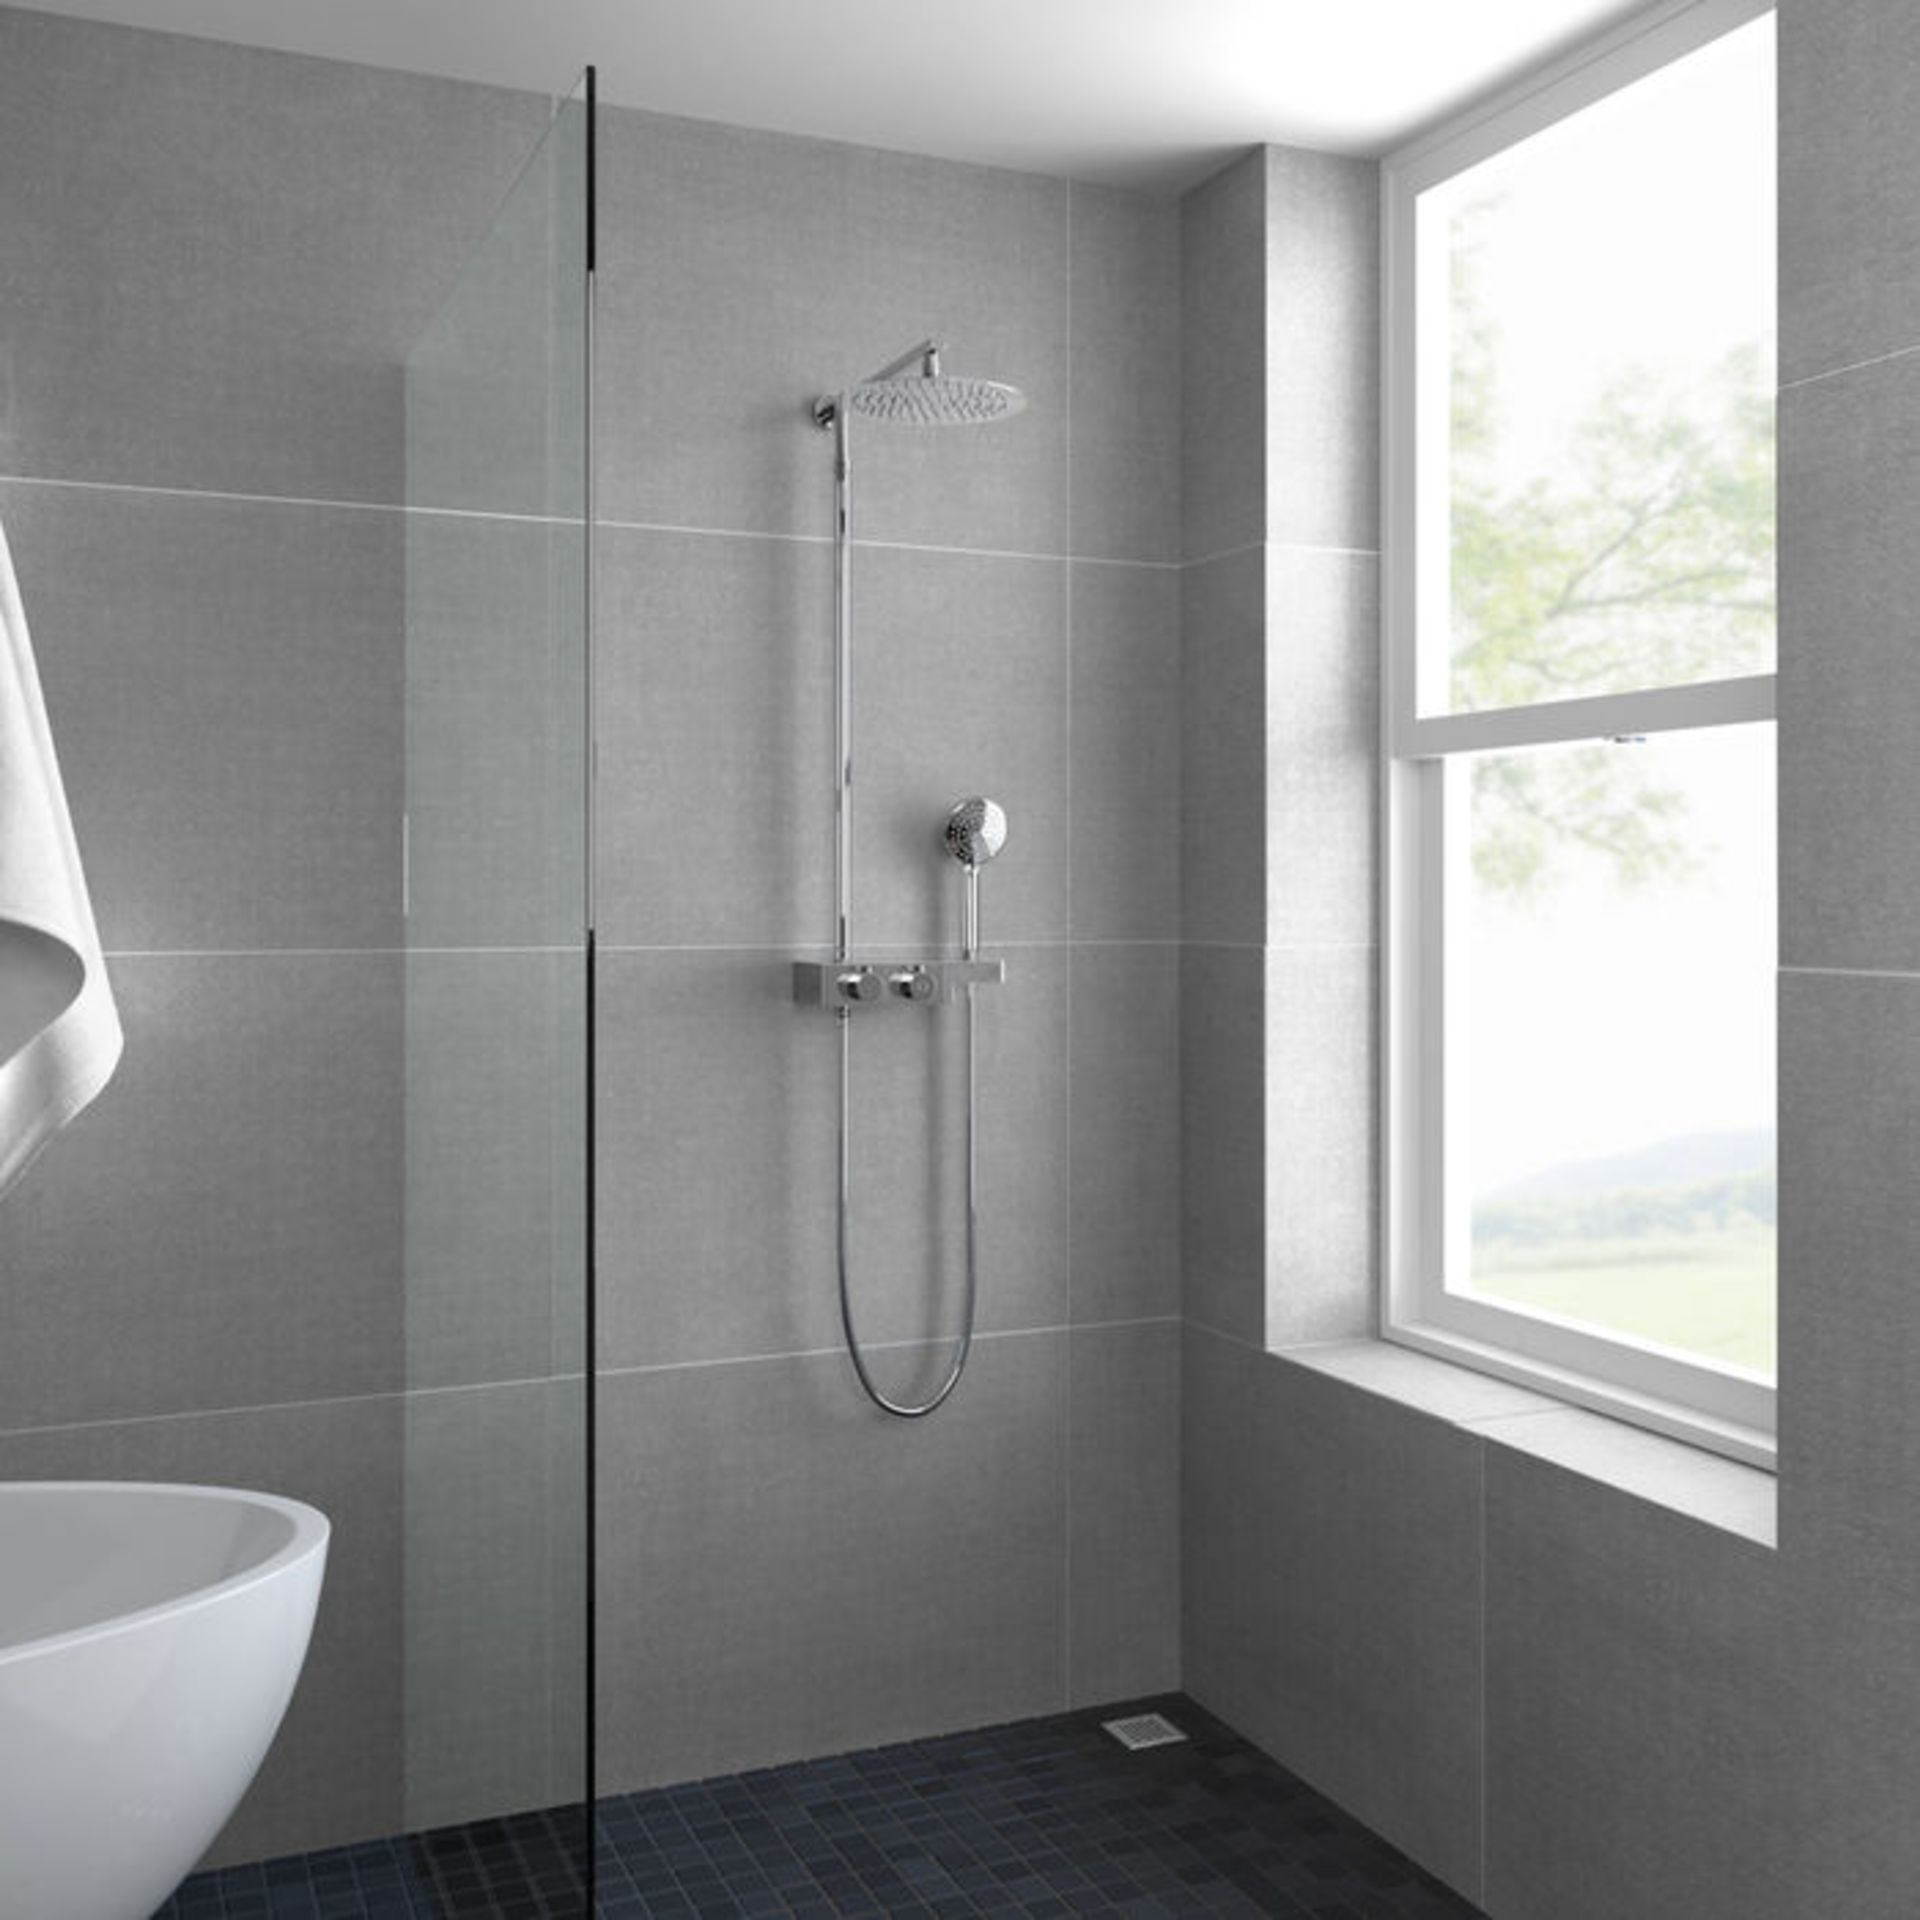 (H214) Round Exposed Thermostatic Mixer Shower Kit & Large Head. Cool to touch shower for additional - Bild 3 aus 6